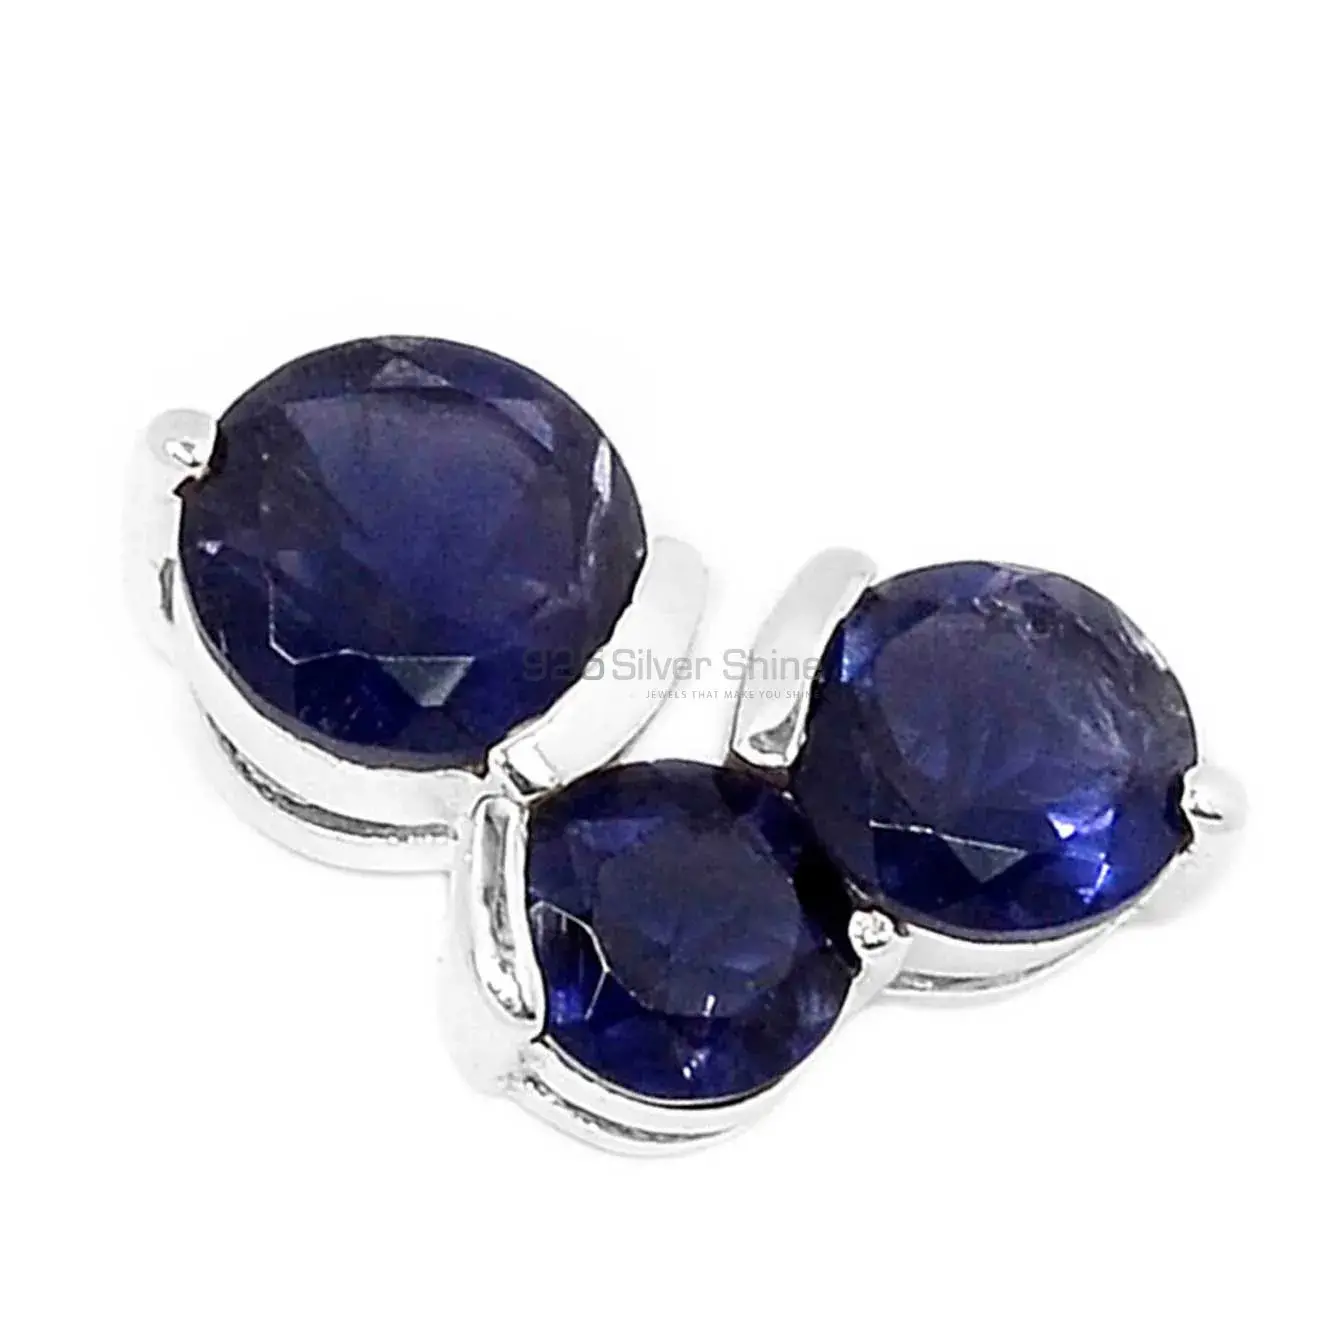 Top Quality Iolite Gemstone Pendants Suppliers In 925 Fine Silver Jewelry 925SP298-2_1